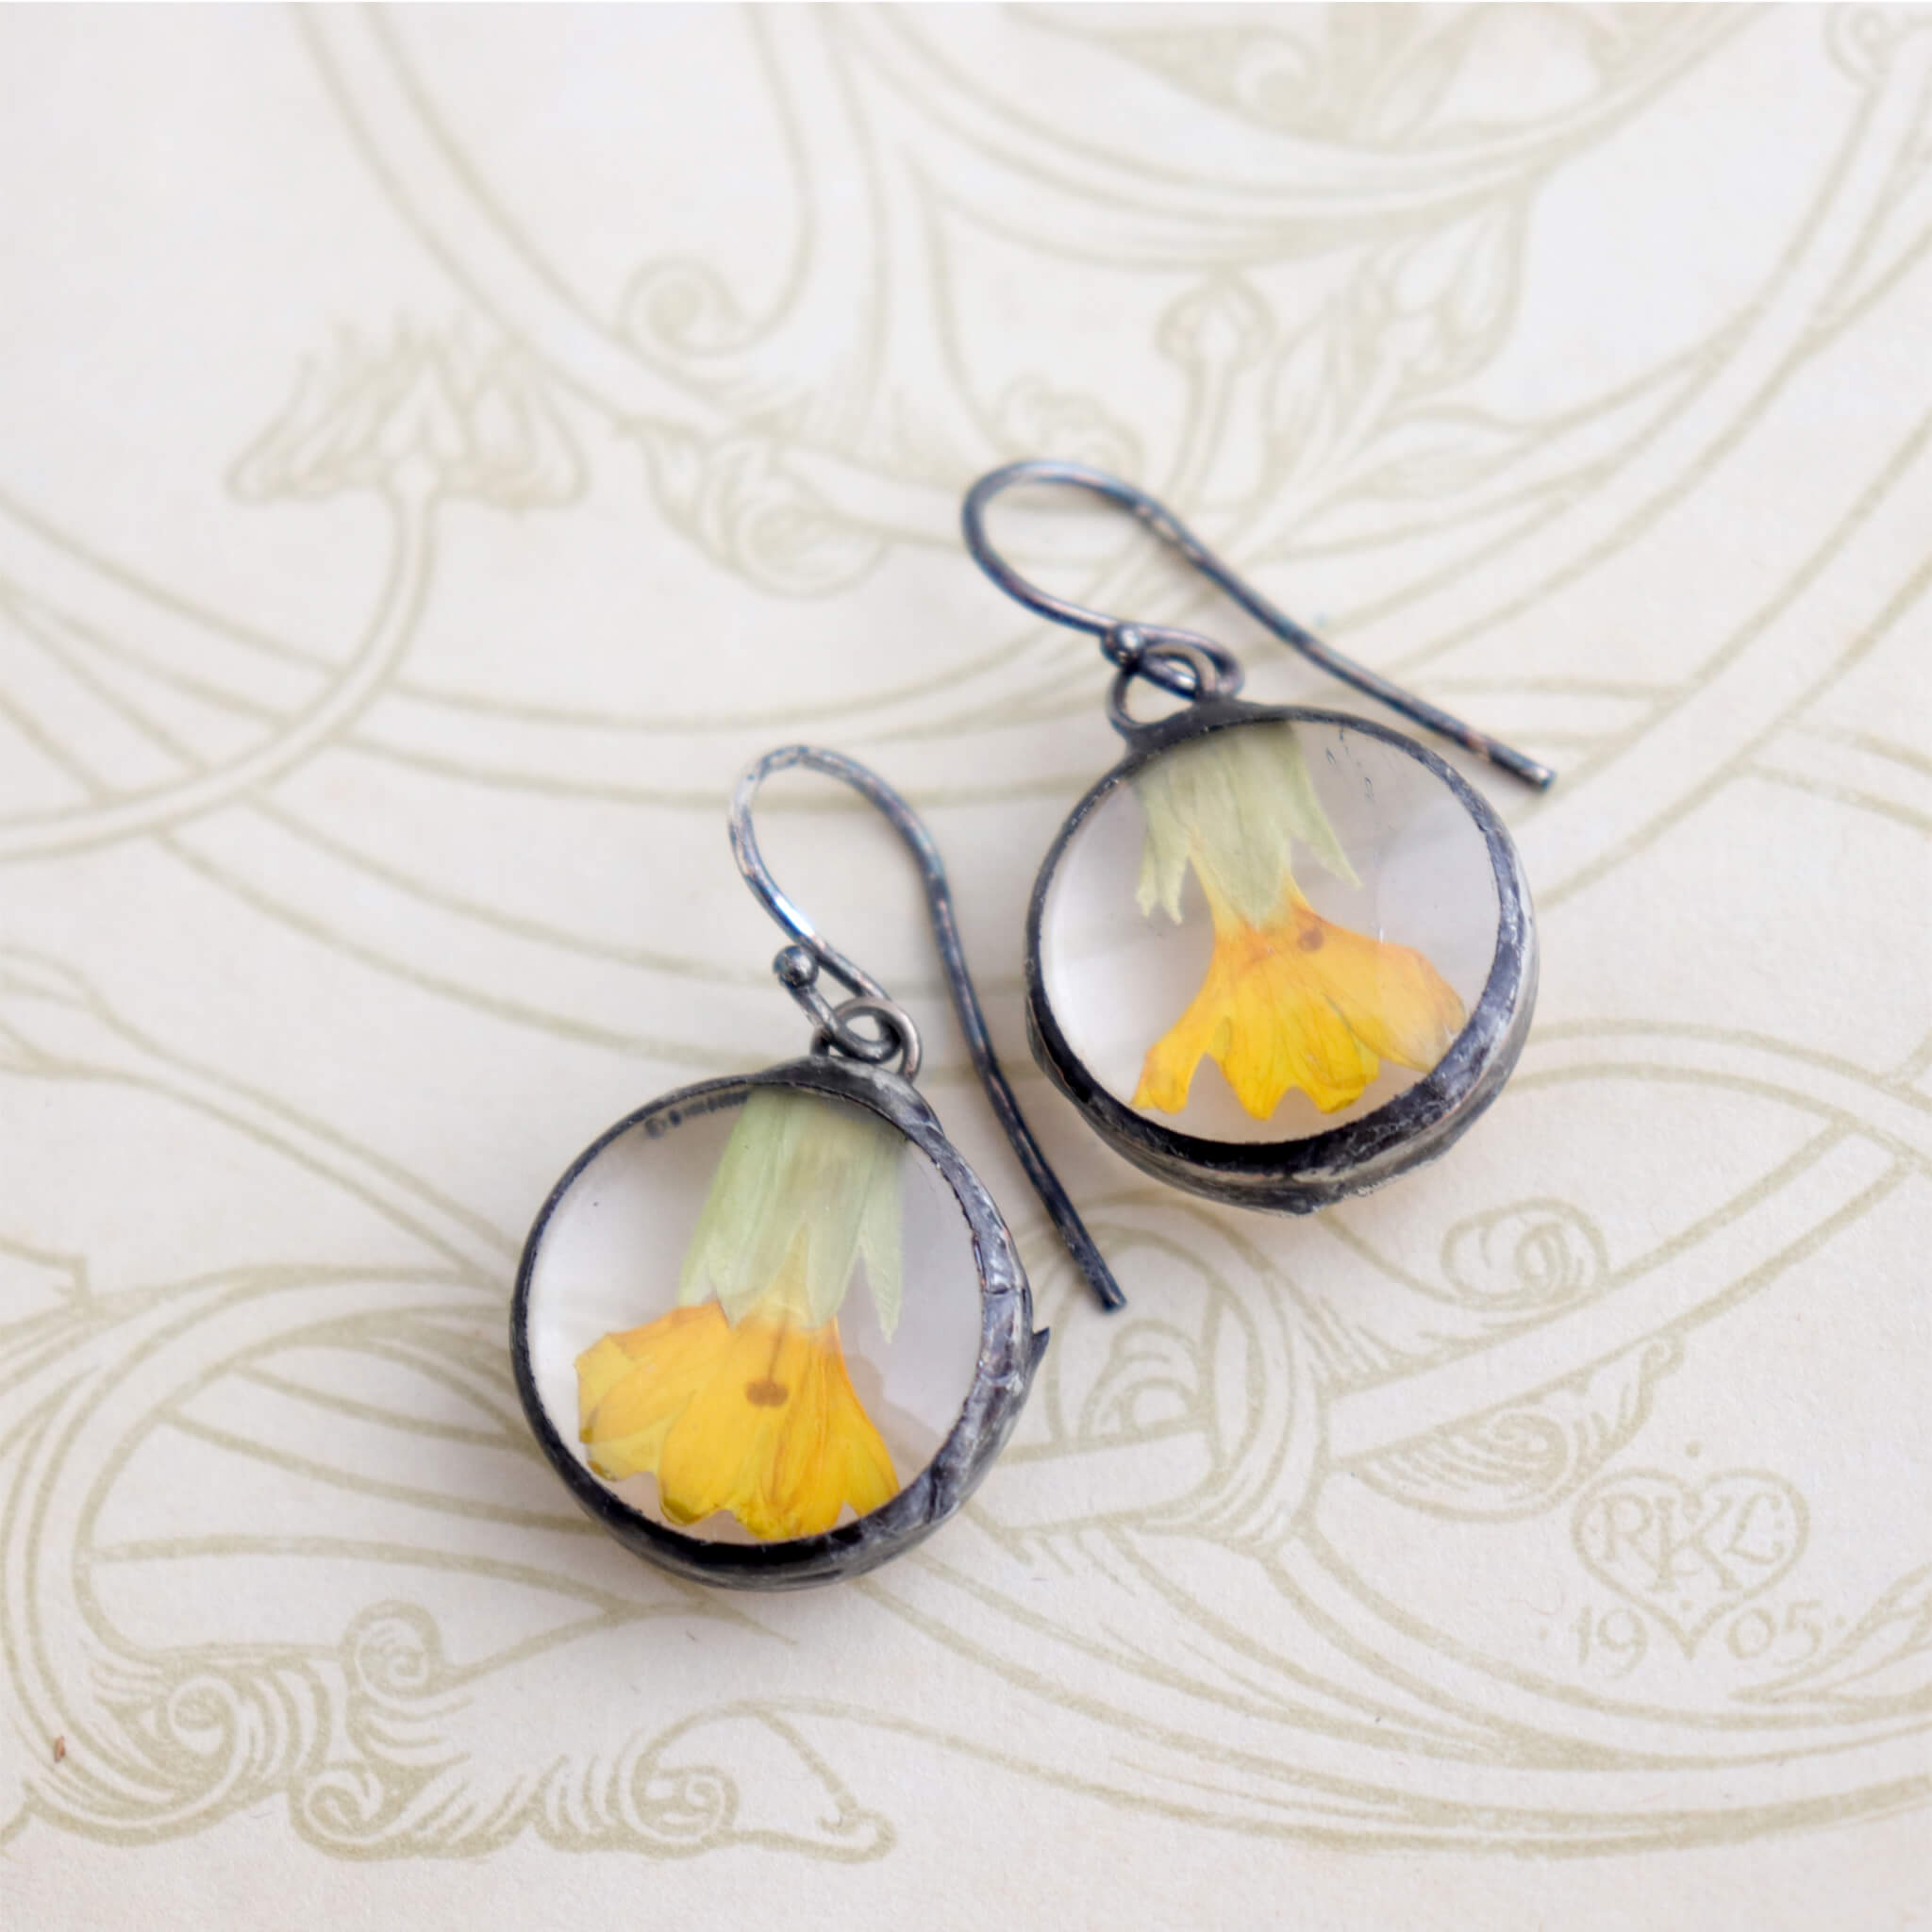 Round earrings with yellow flowers inside lying on an old book